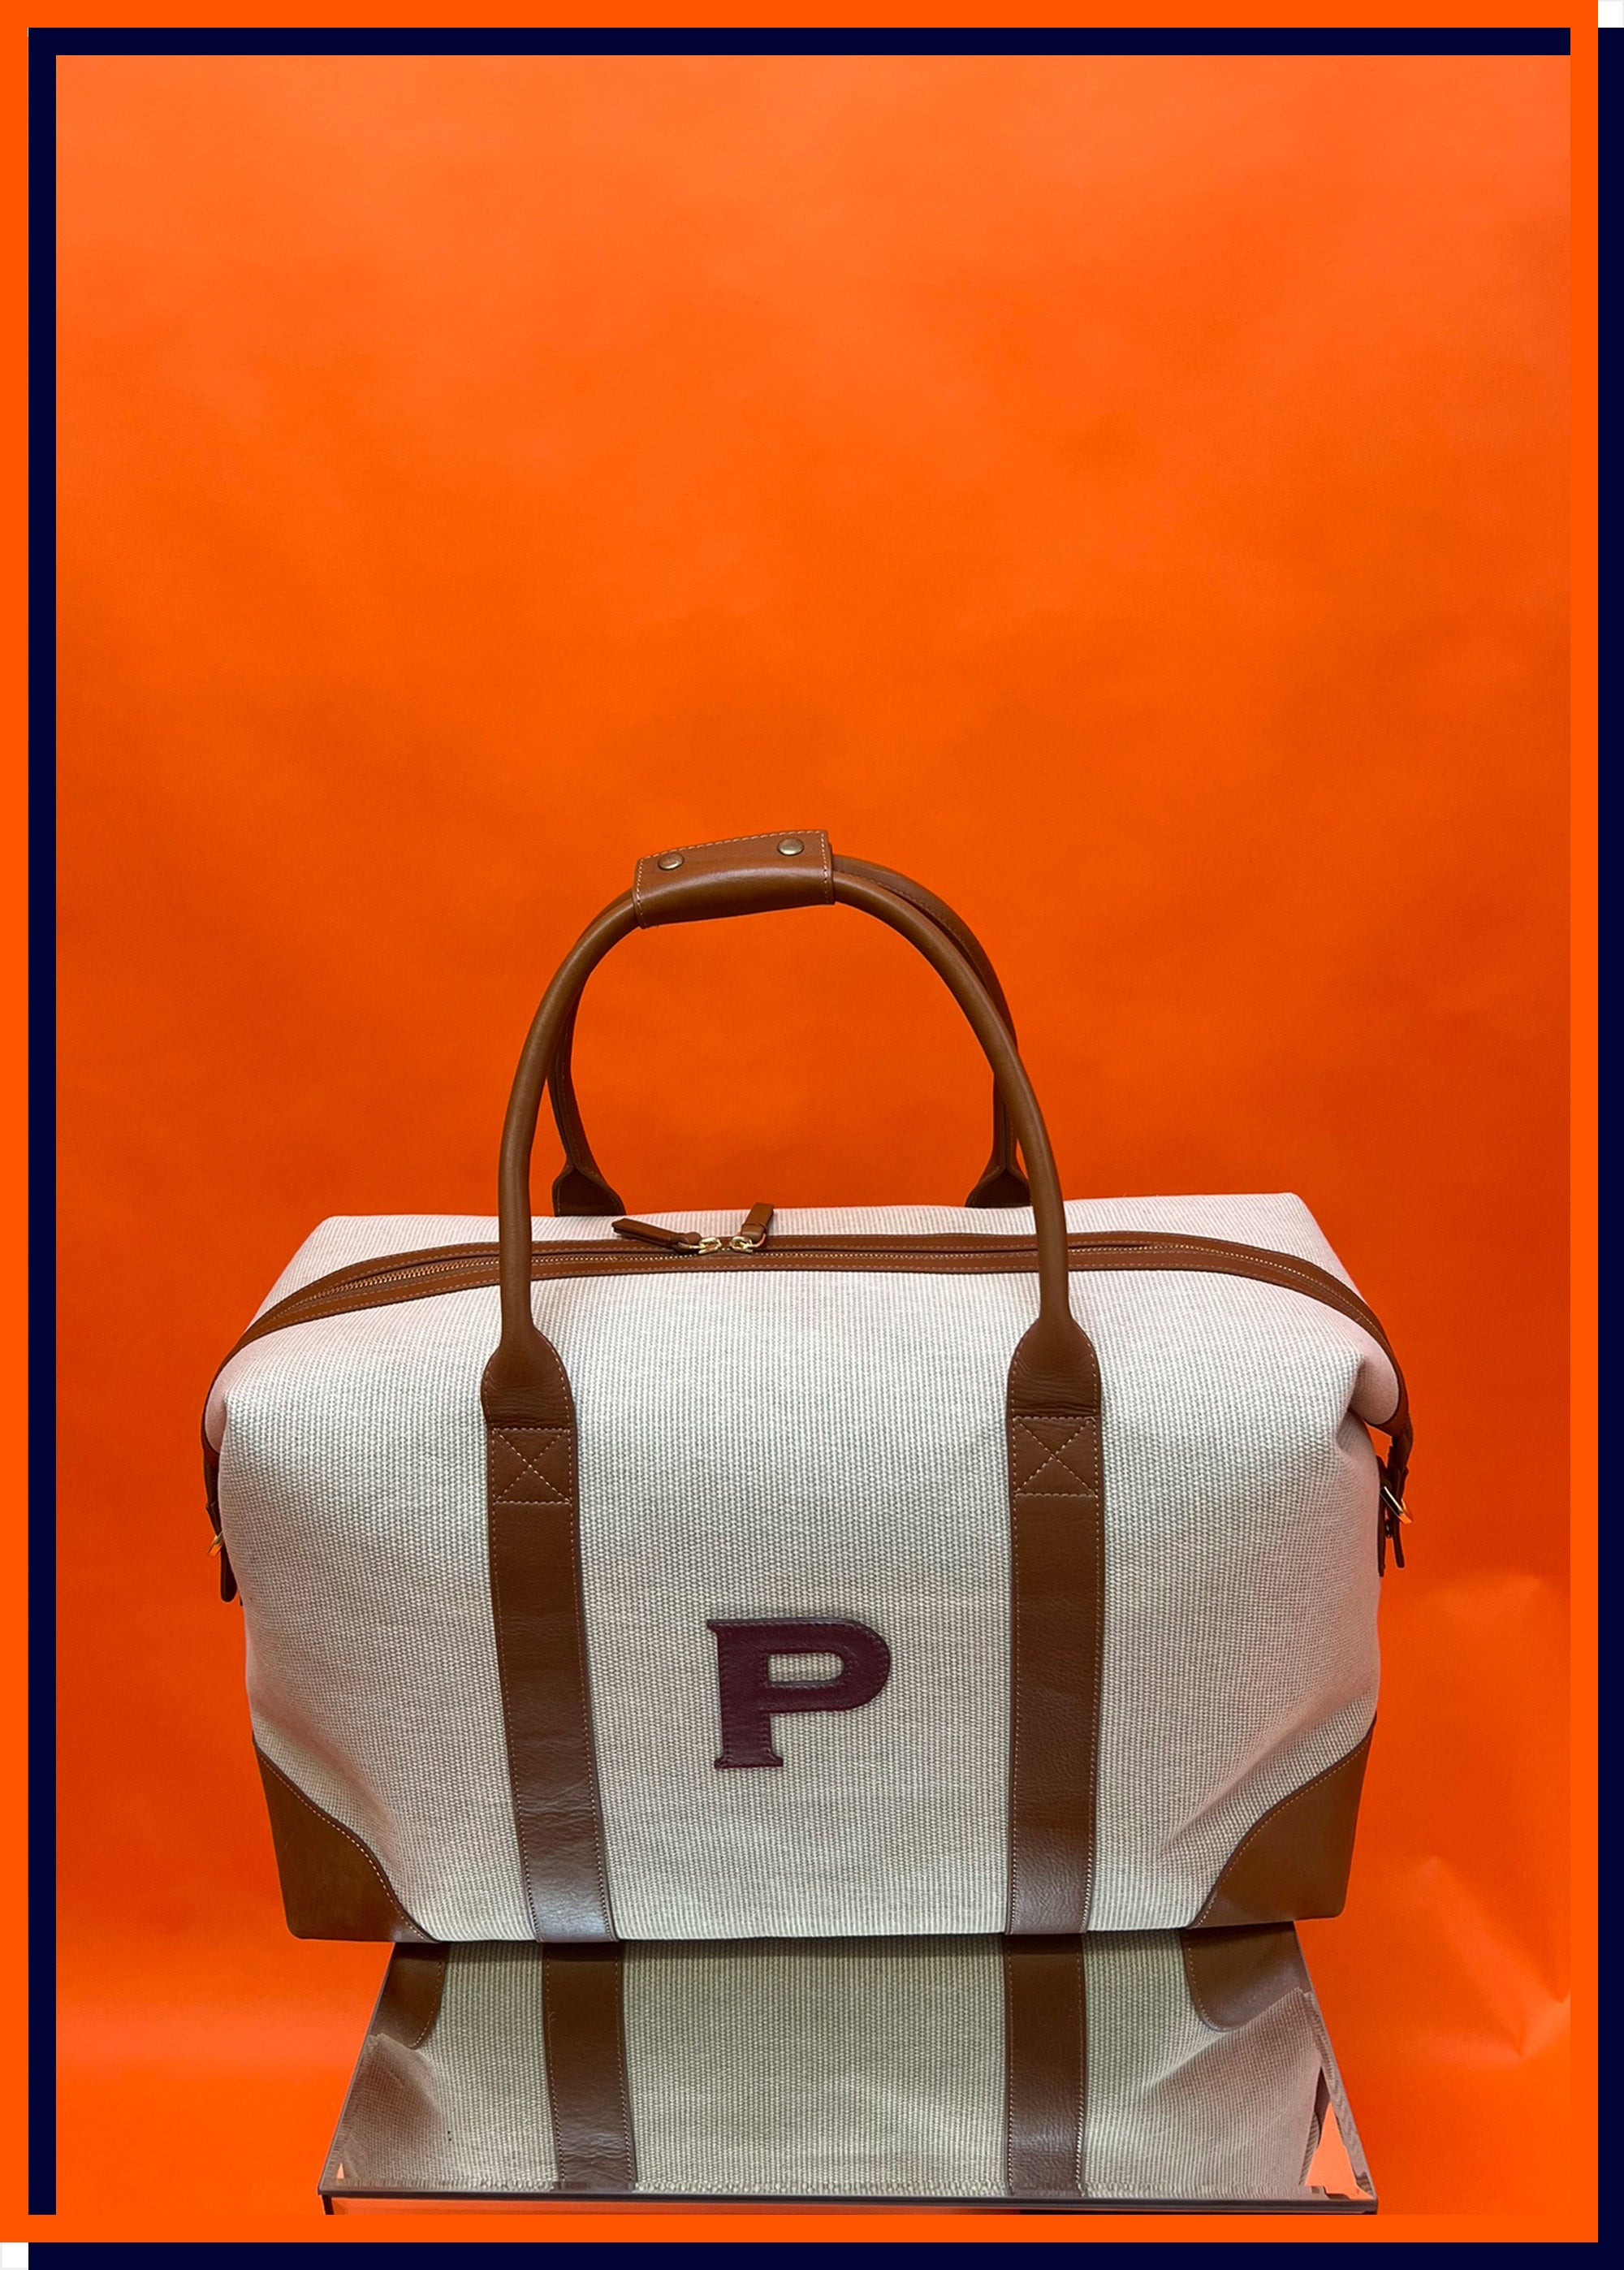 Letter 'P' The Weekend Bag, Cream & Claret